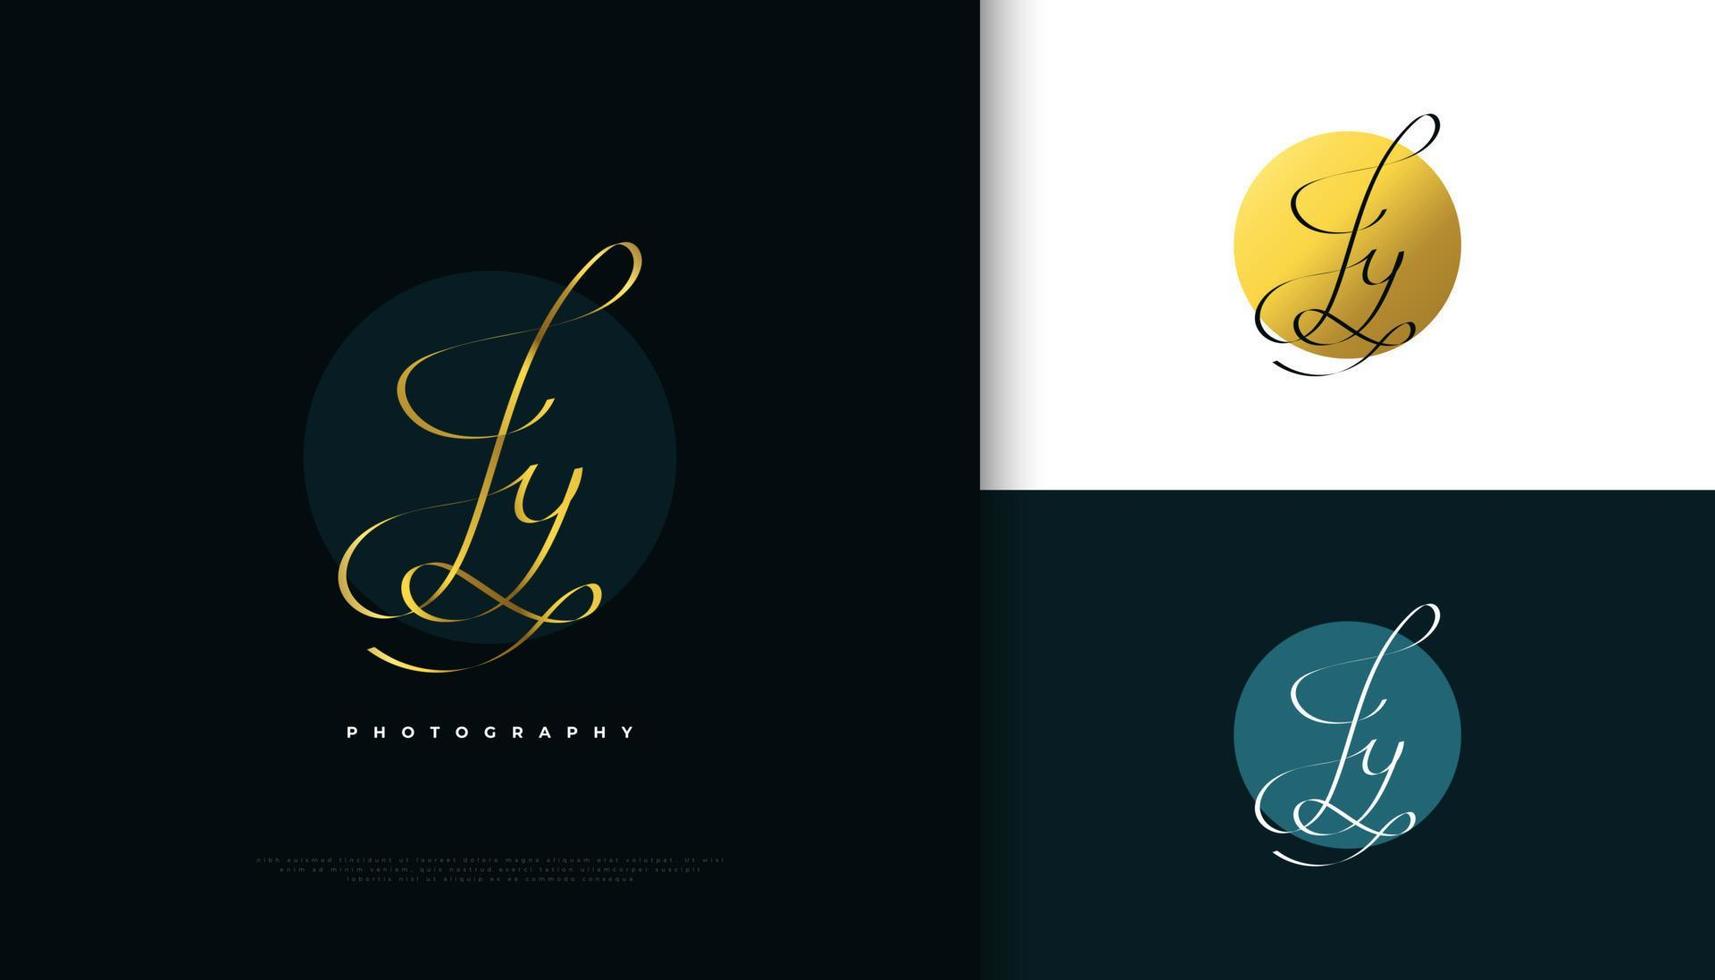 JY Initial Signature Logo Design with Elegant and Minimalist Gold Handwriting Style. Initial J and Y Logo Design for Wedding, Fashion, Jewelry, Boutique and Business Brand Identity vector